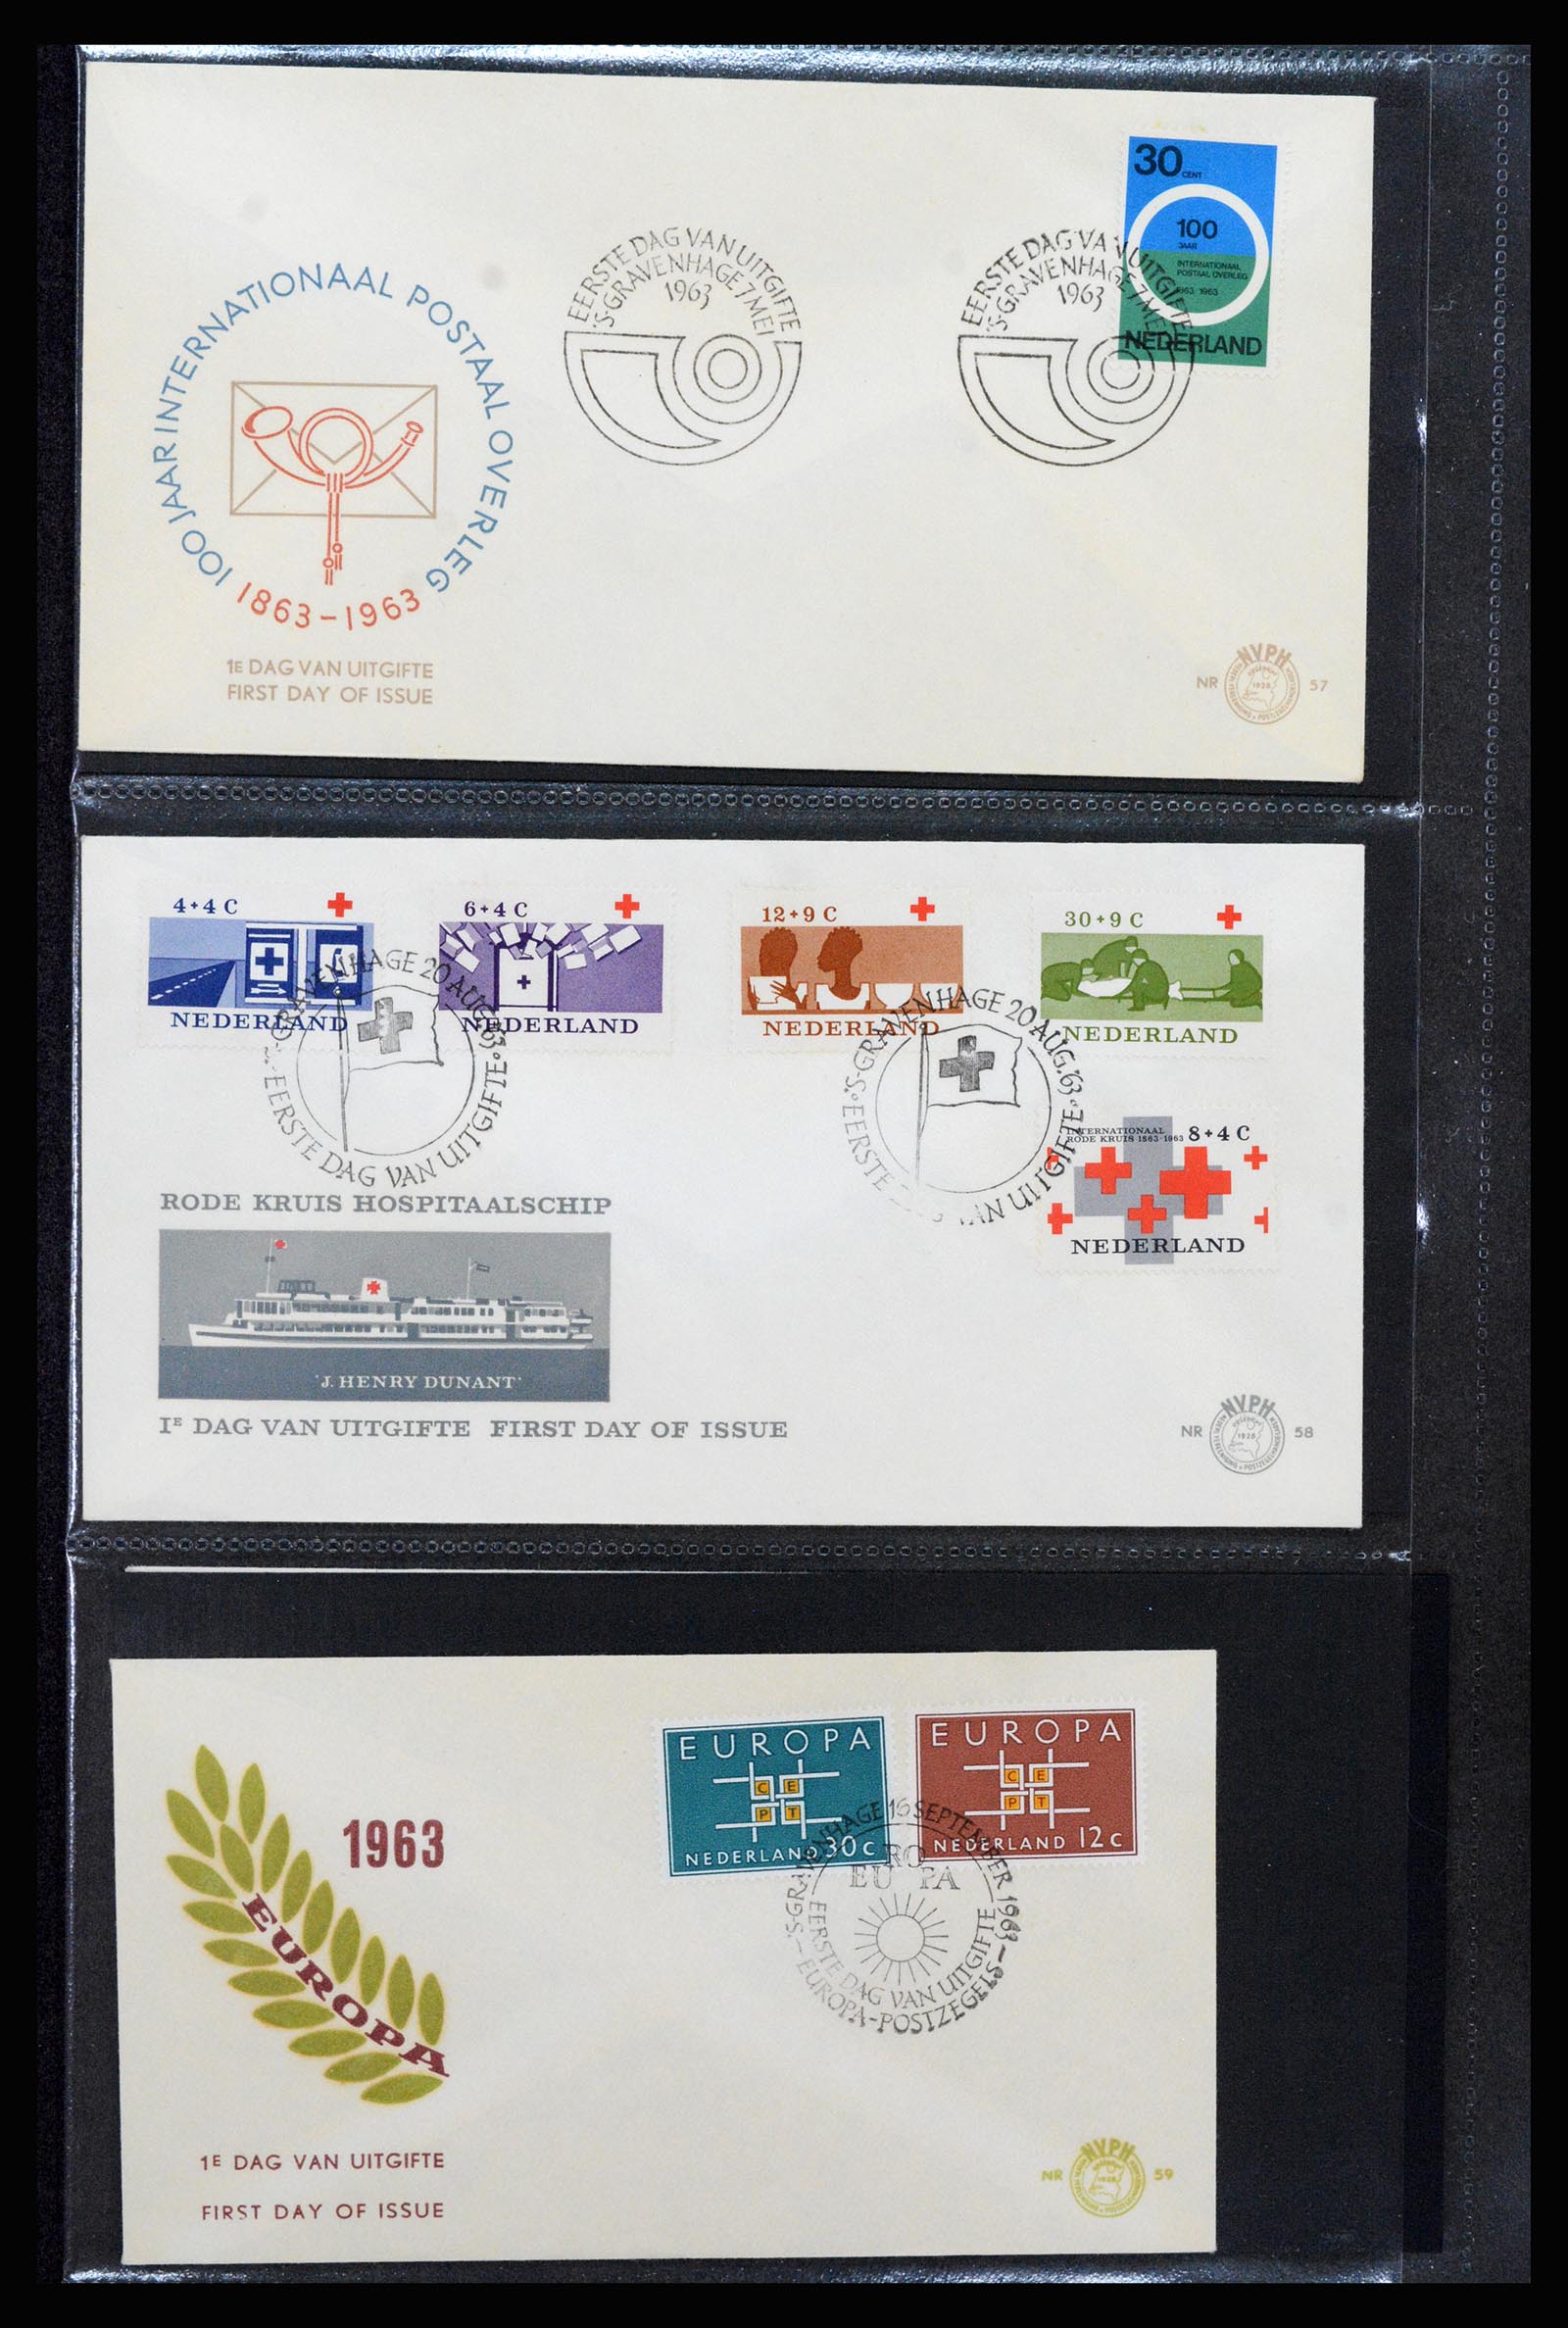 37264 020 - Stamp collection 37264 Netherlands FDC's 1950-1975.